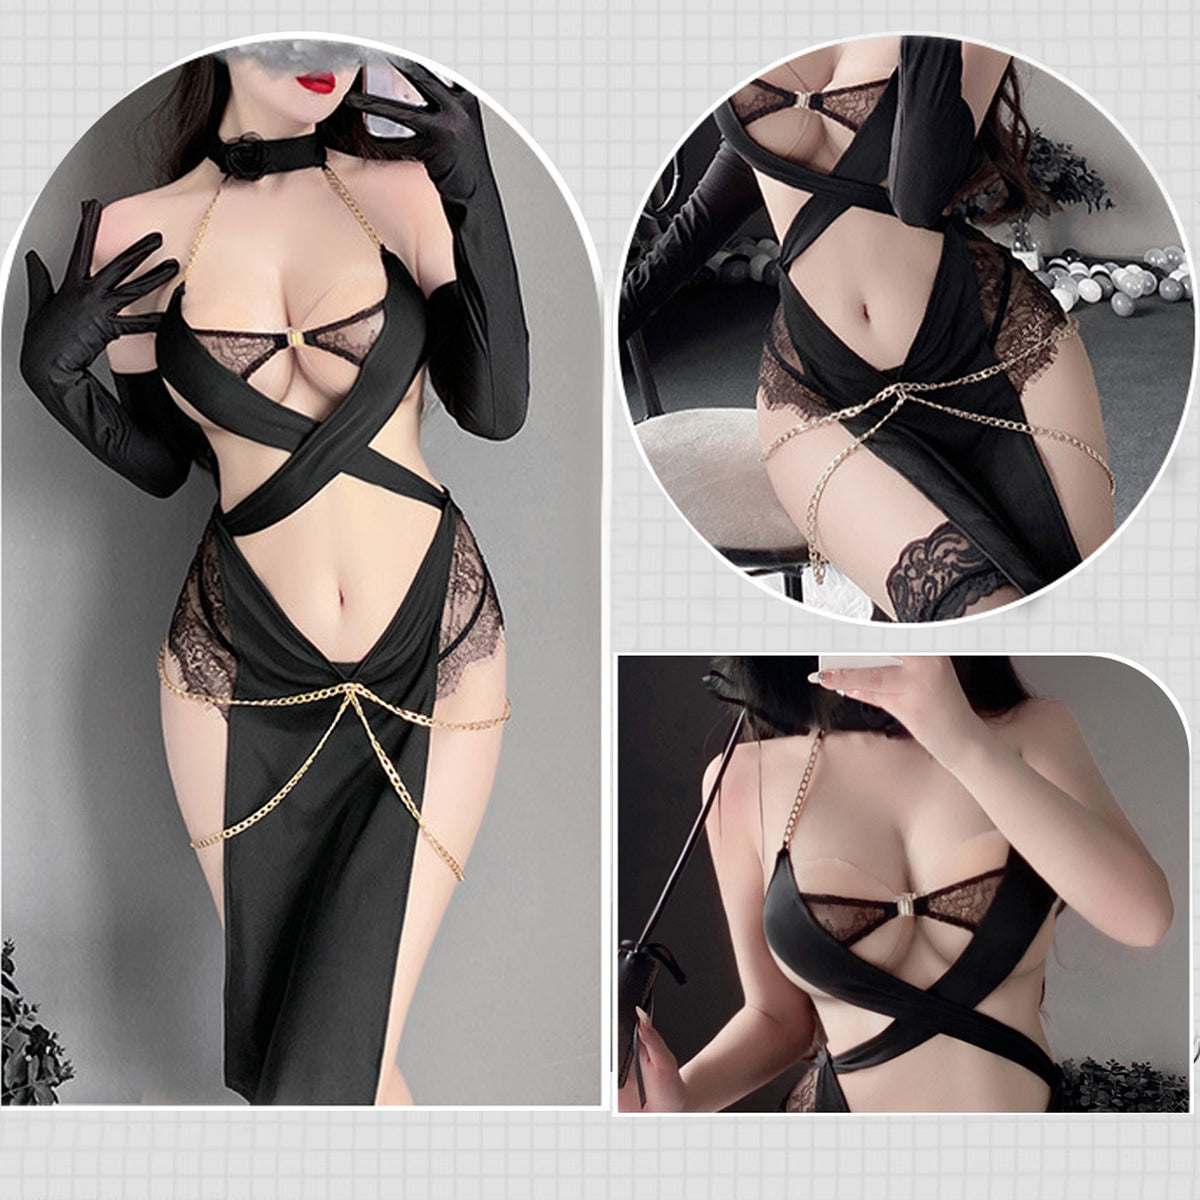 Yomorio Sultry Neko Girl Cosplay Costumes Anime Cat Exotic Lingerie Set Goddess Anubis Outfits